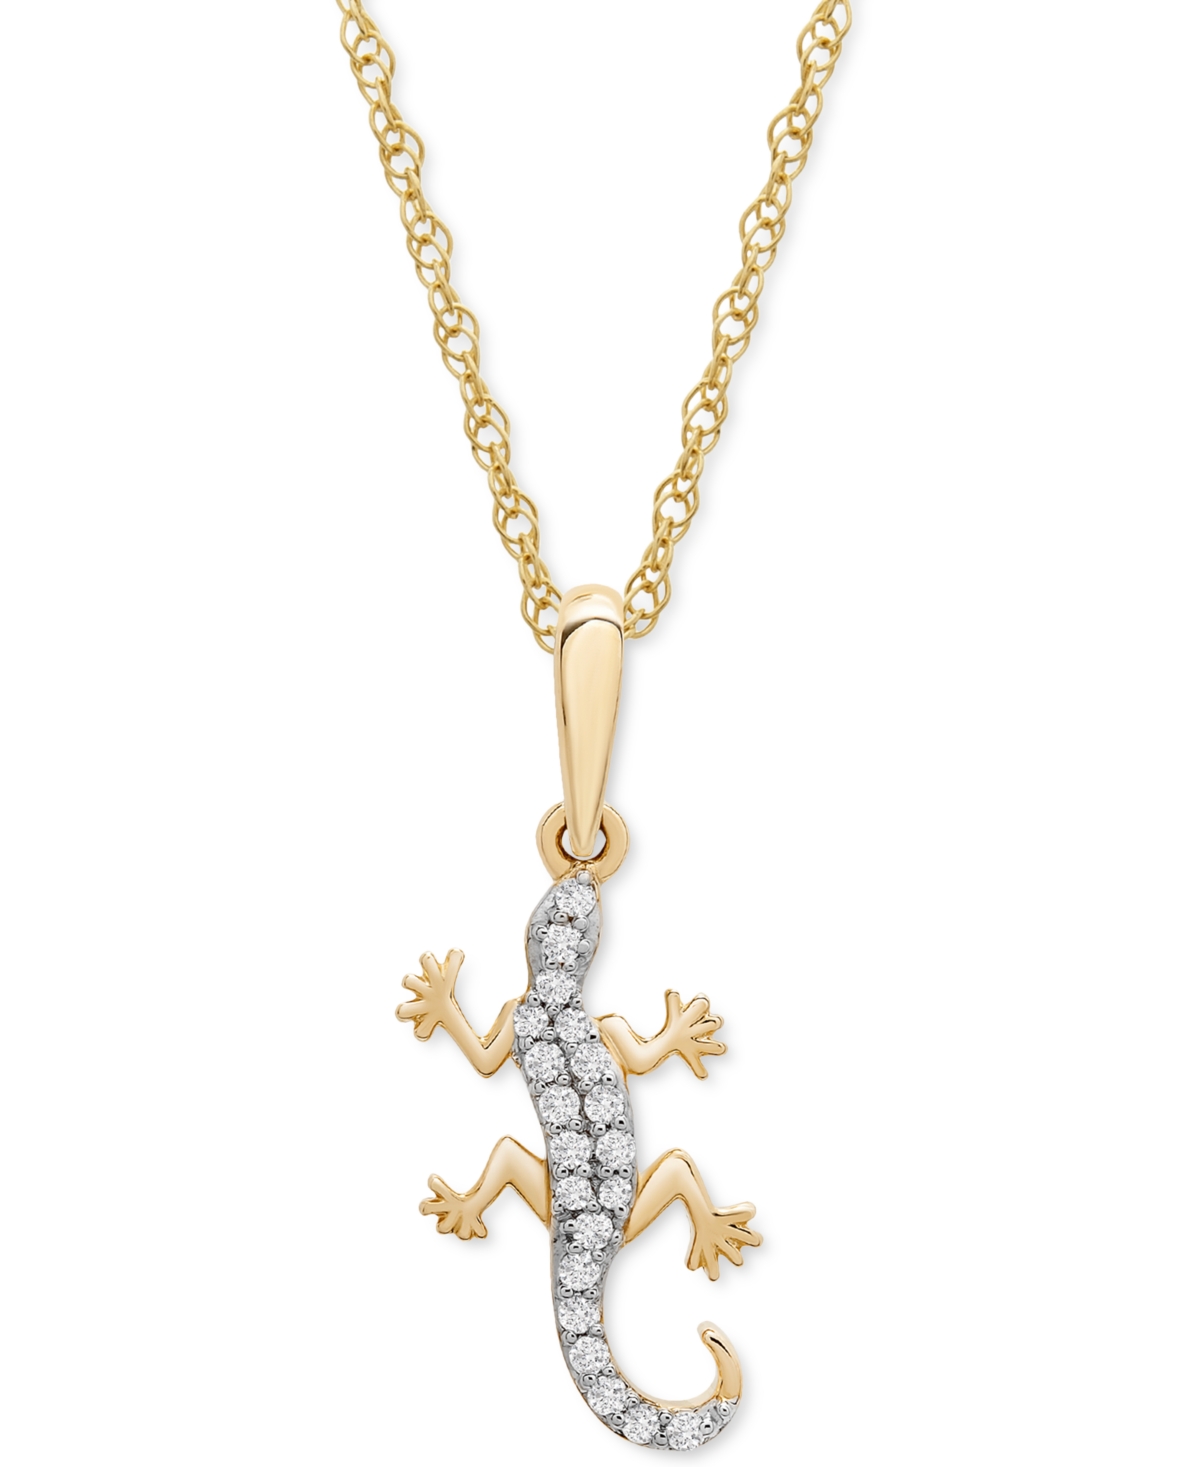 Diamond Lizard 18" Pendant Necklace (1/10 ct. t.w.) in 10k Gold,Created for Macy's - Yellow Gold